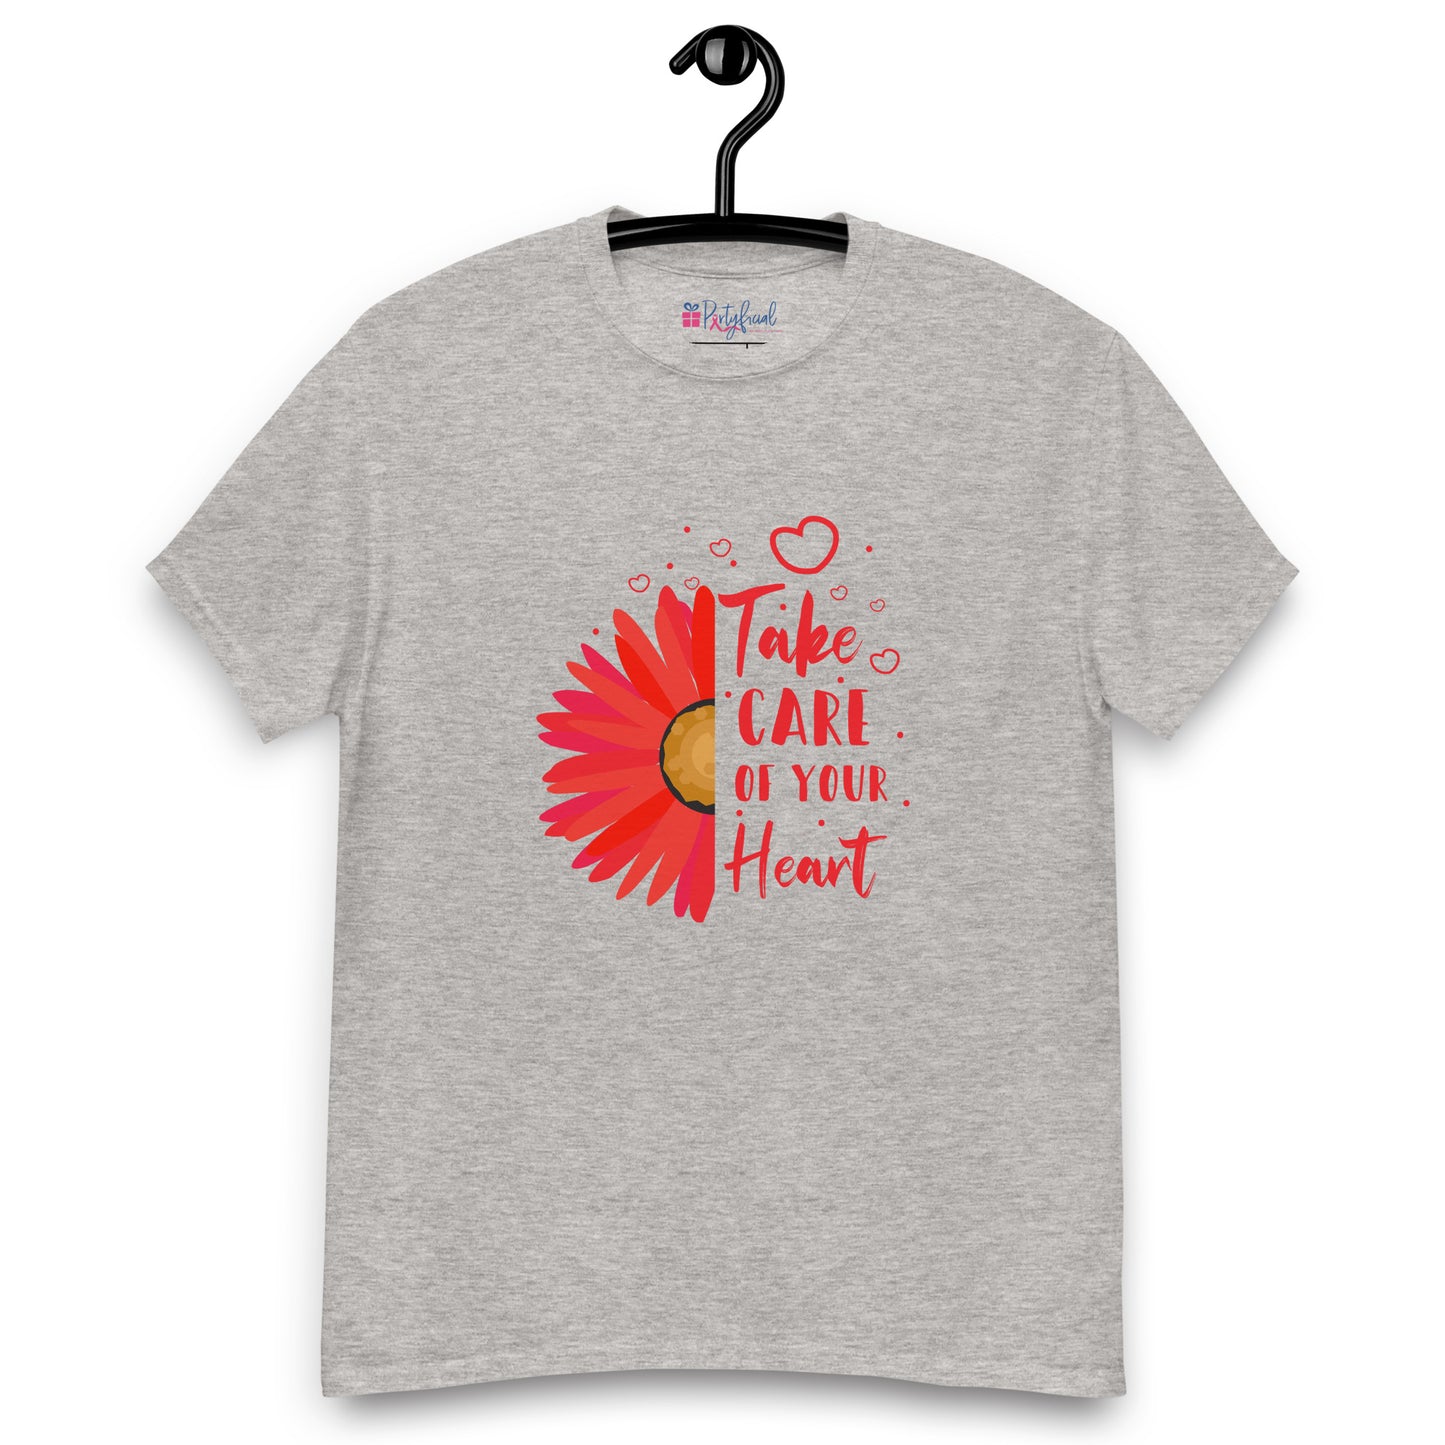 Take Care of Your Heart tee